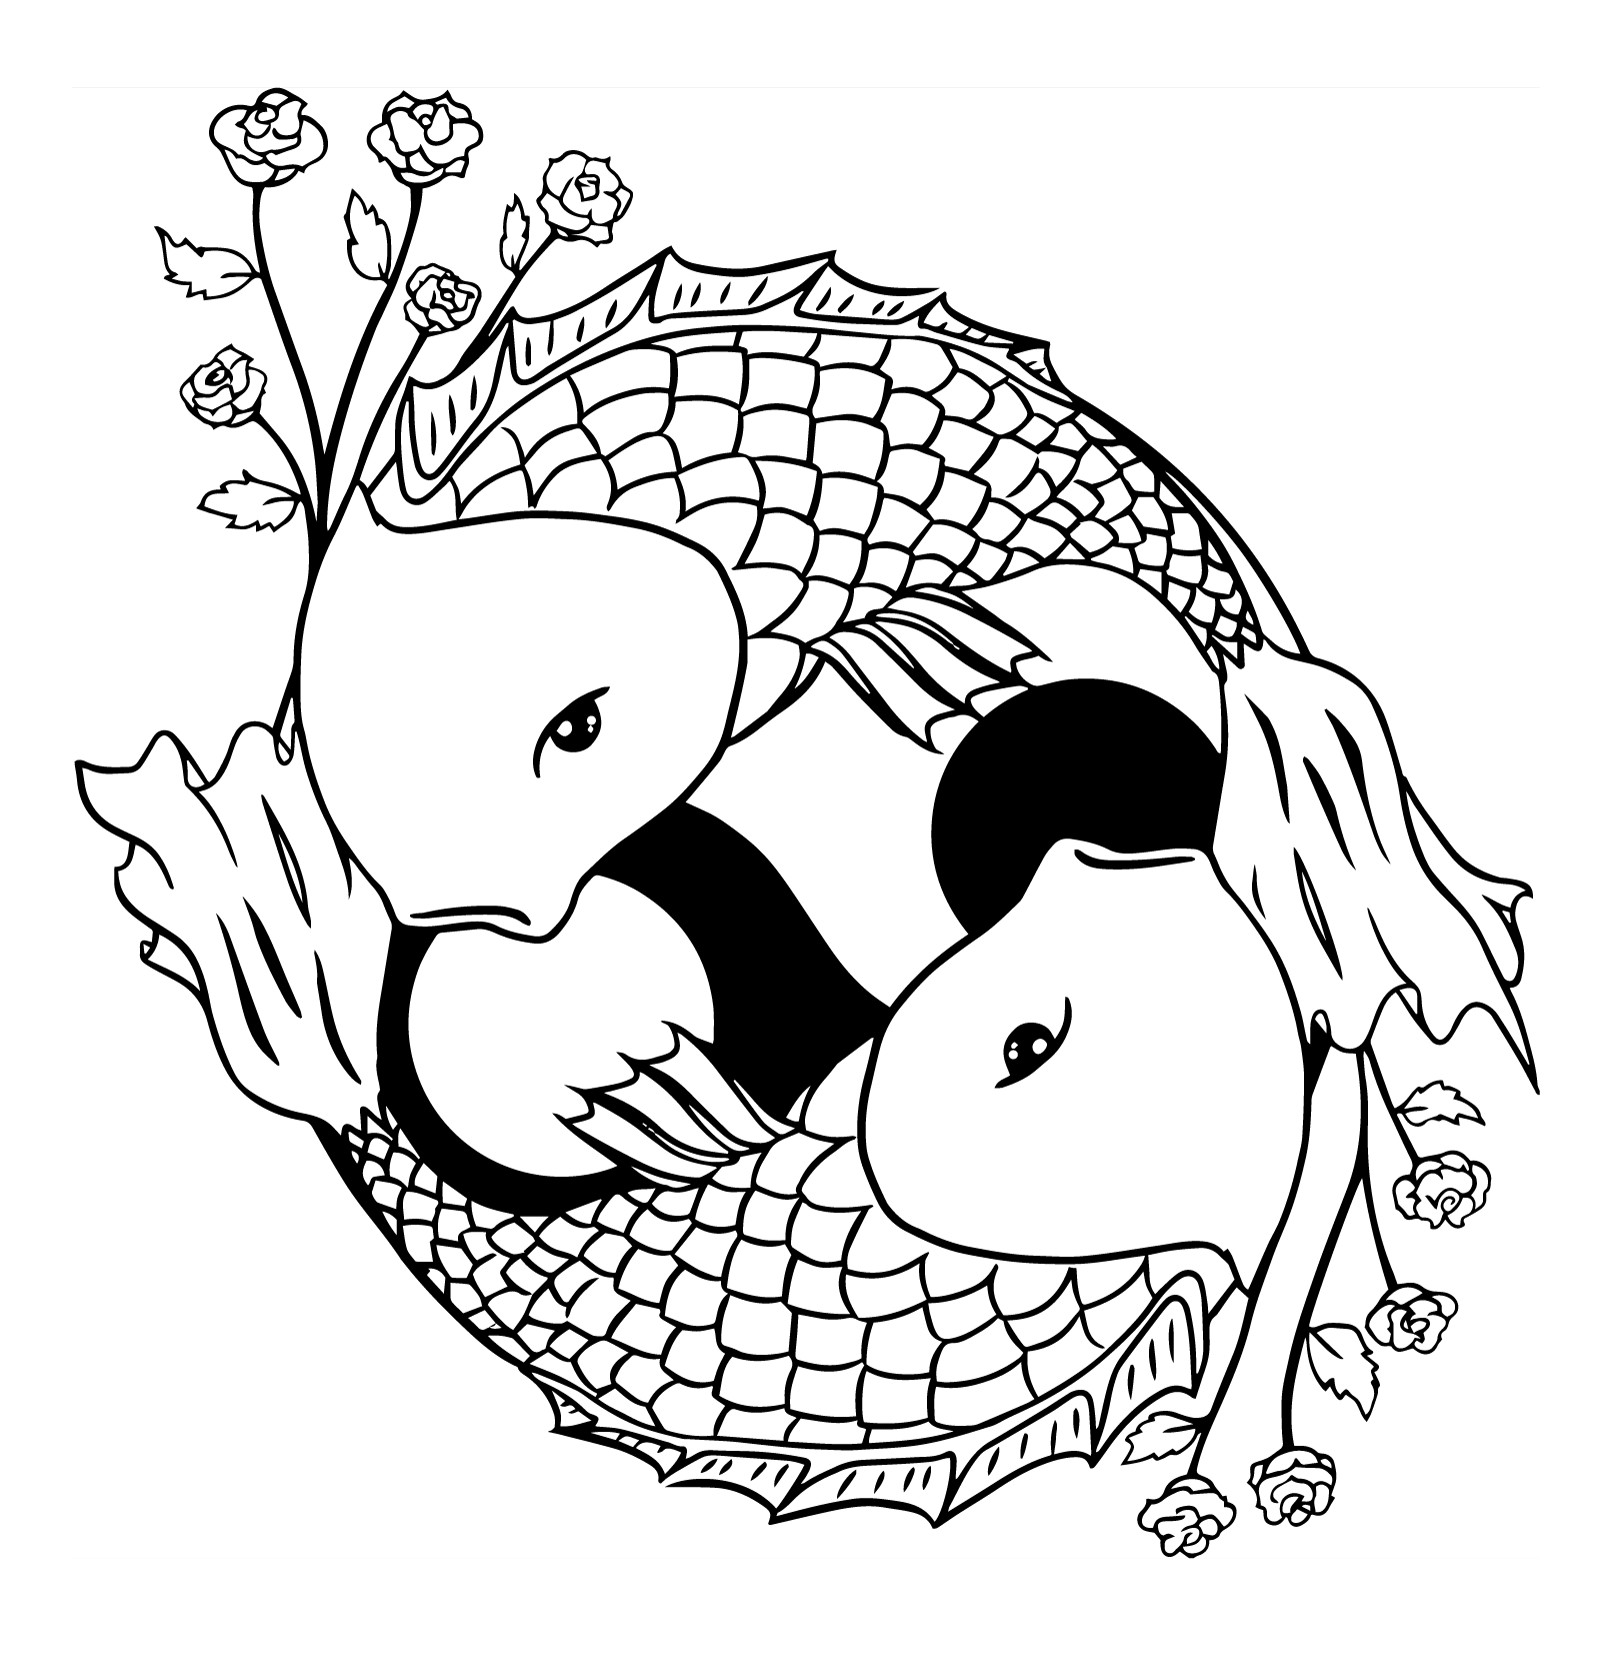 Coloring Pages Of Fish
 Free Koi Fish Coloring Page Download Free Clip Art Free